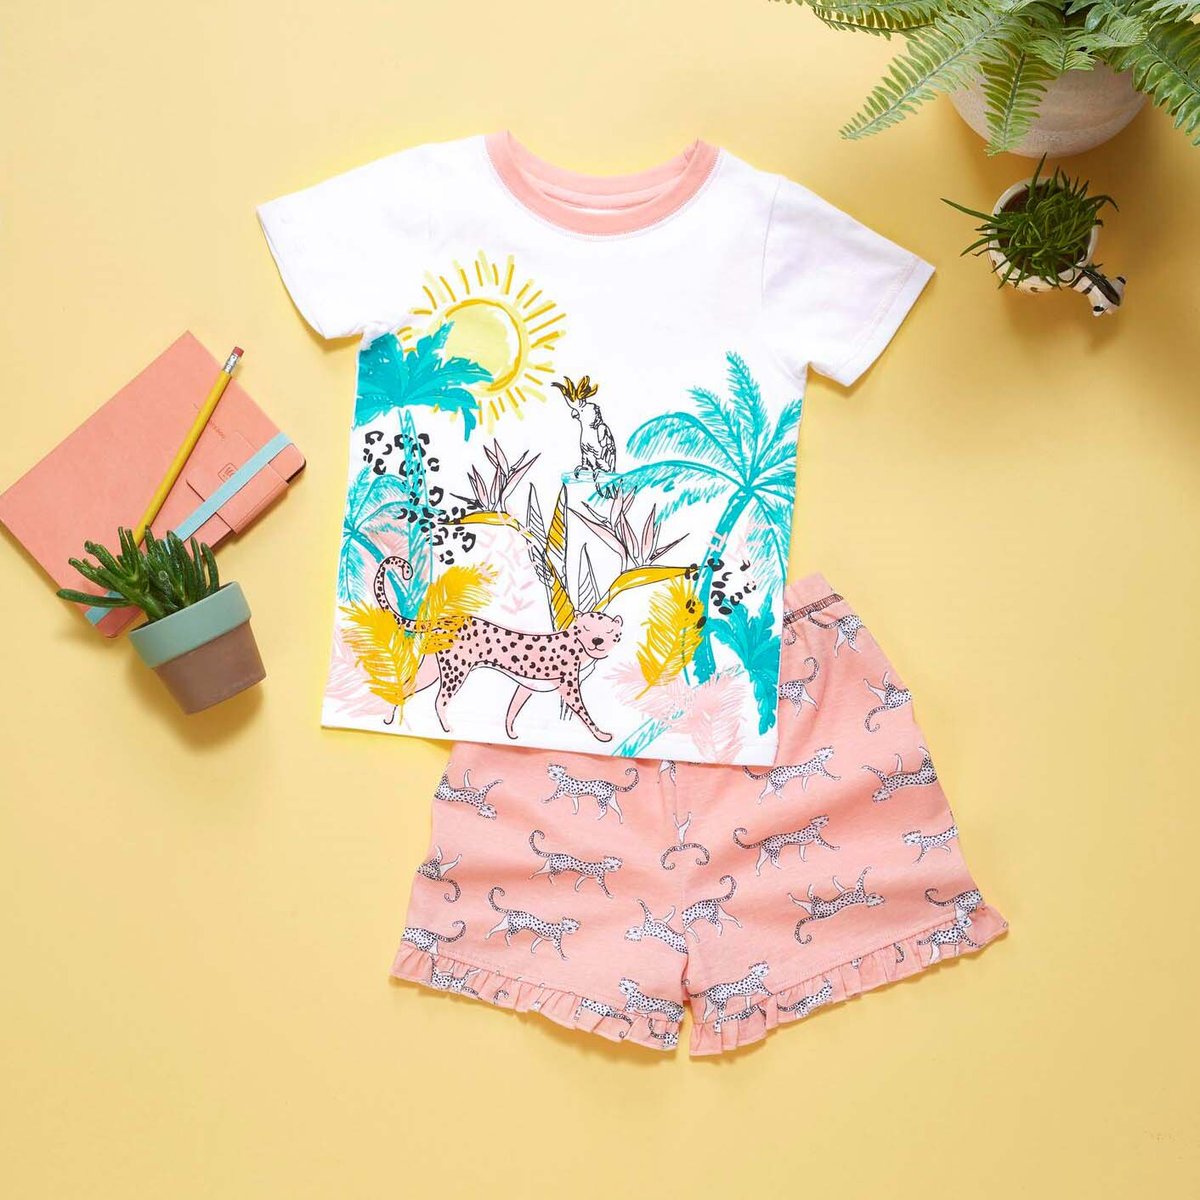 From ages 12 months all the way to 8 years, you can get your hands on these super fun Jungle print PJ's for your kids. 🌴🐆 100% cotton and amazing quality too! Check out my online store to pick up a set before they're gone. 🐯🦁
wu.to/6075w7
#KidsPyjamas #Avon